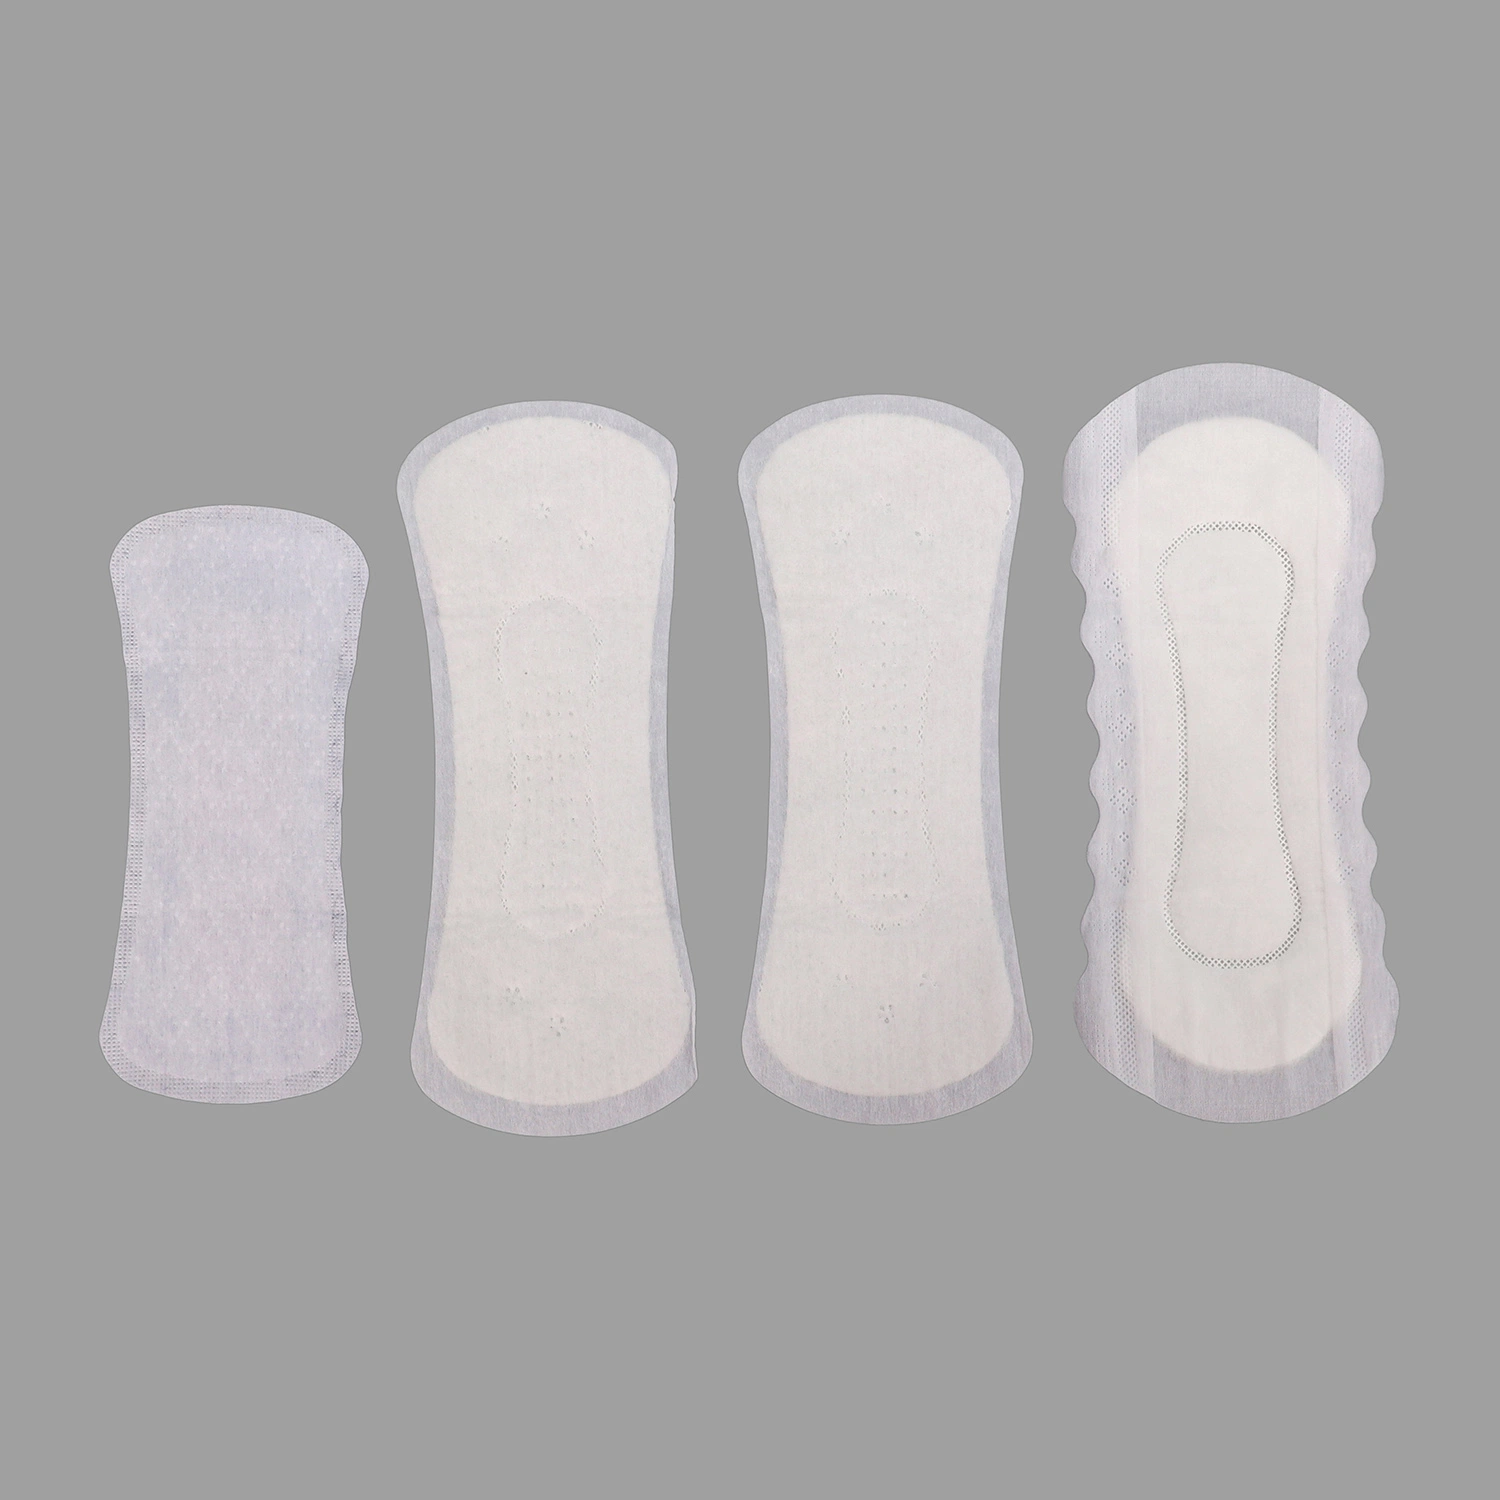 Sanitary Napkins/Pads with Wings/Superior Quality/Ultra Absorbent Sanitary Napkins for Women